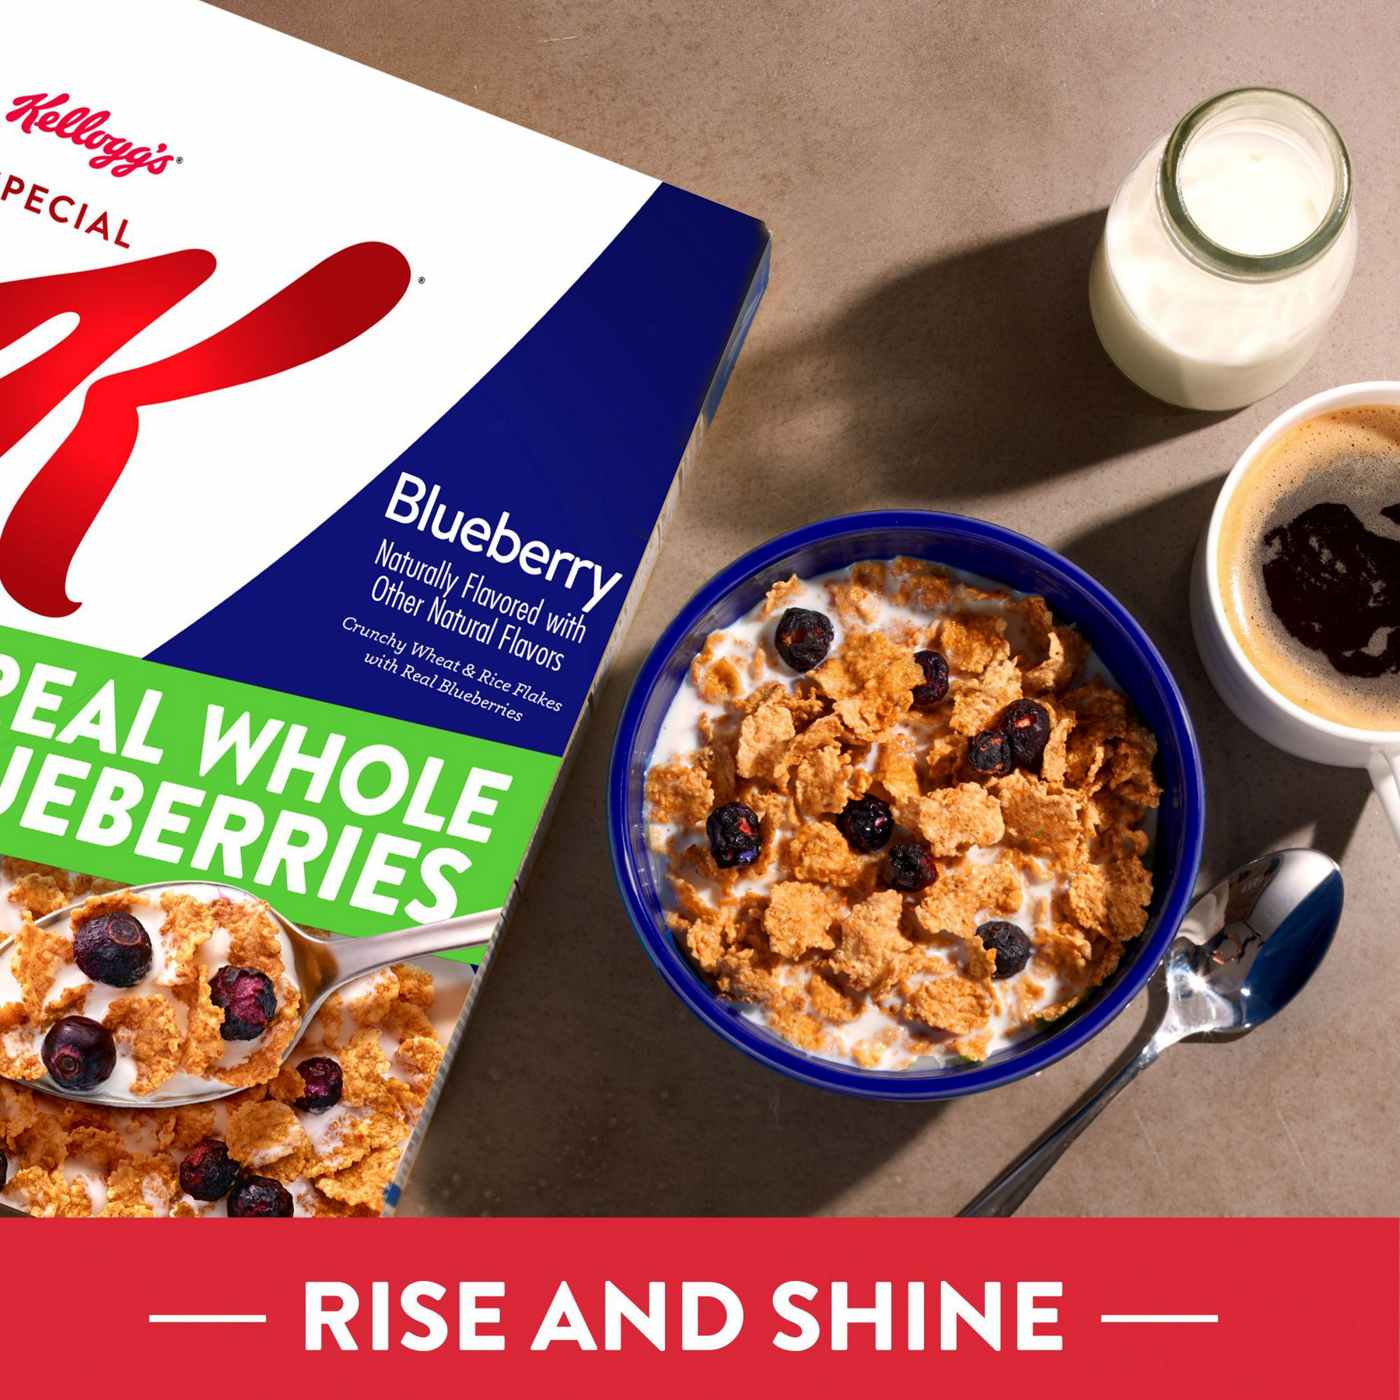 Kellogg's Special K Blueberry Breakfast Cereal; image 2 of 5